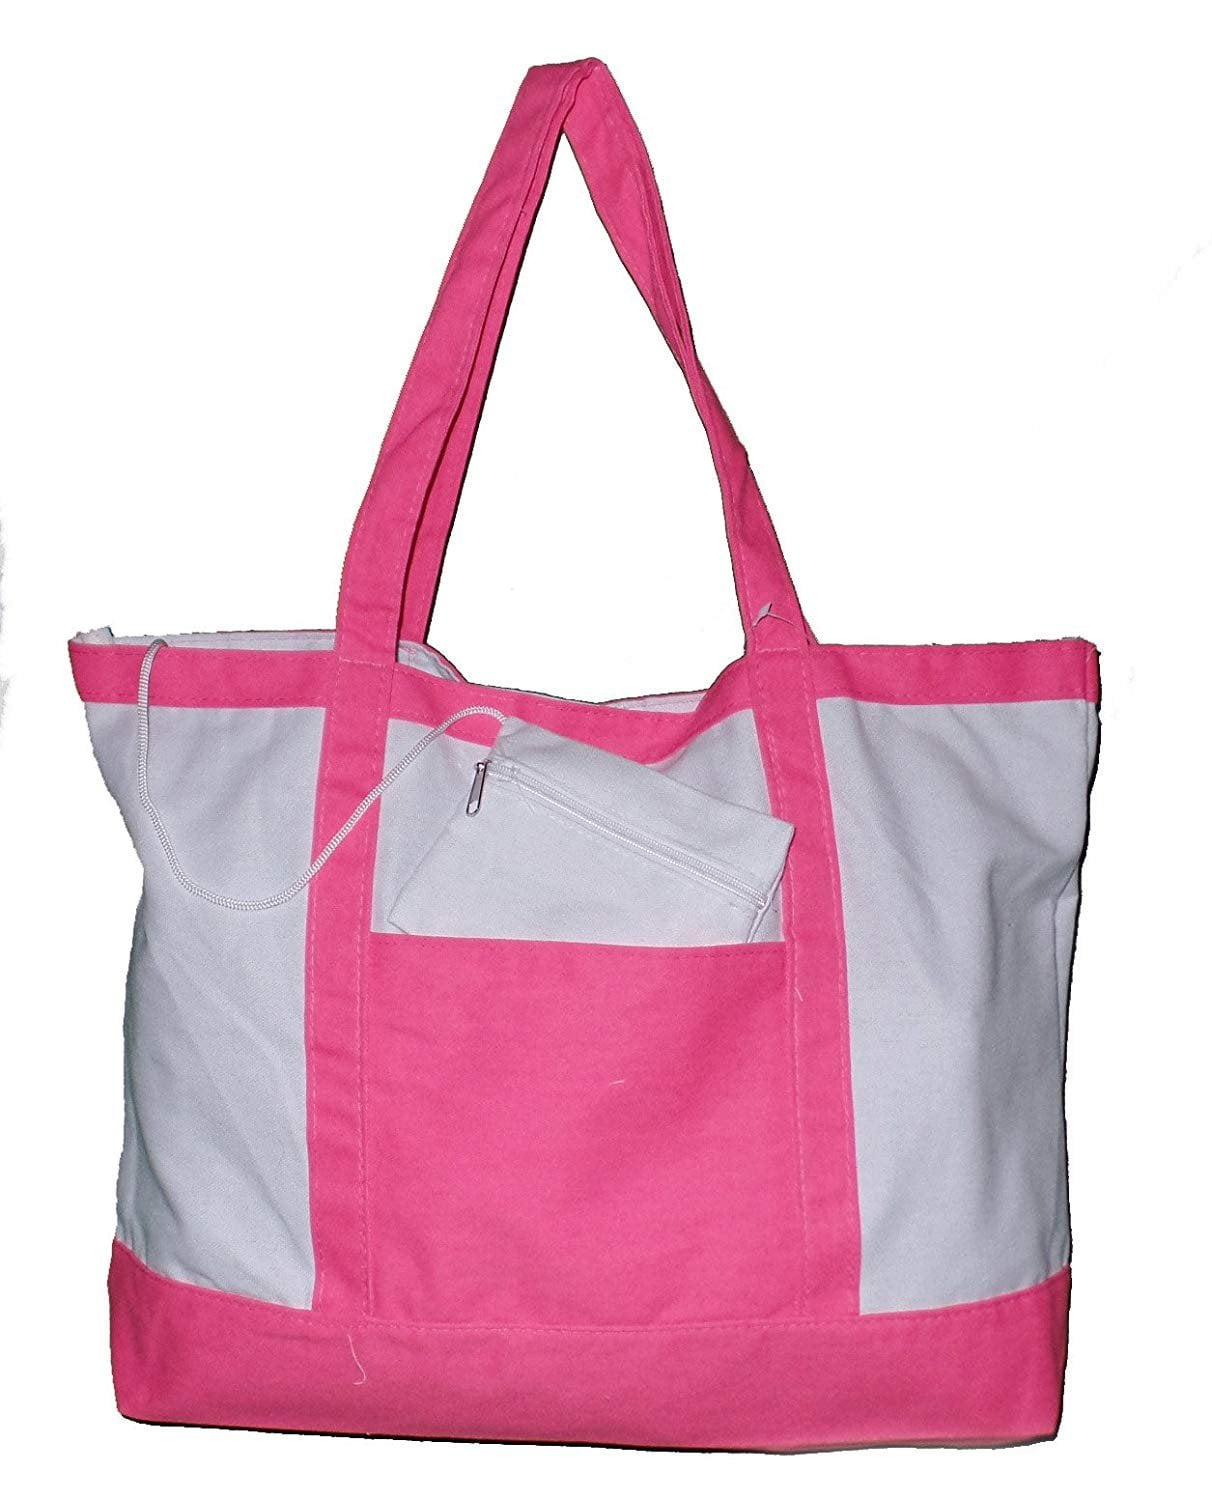 Custom Personalized 22 Inch Cotton Beach or Shopping Tote Bag (Blank, Pink) - www.bagssaleusa.com